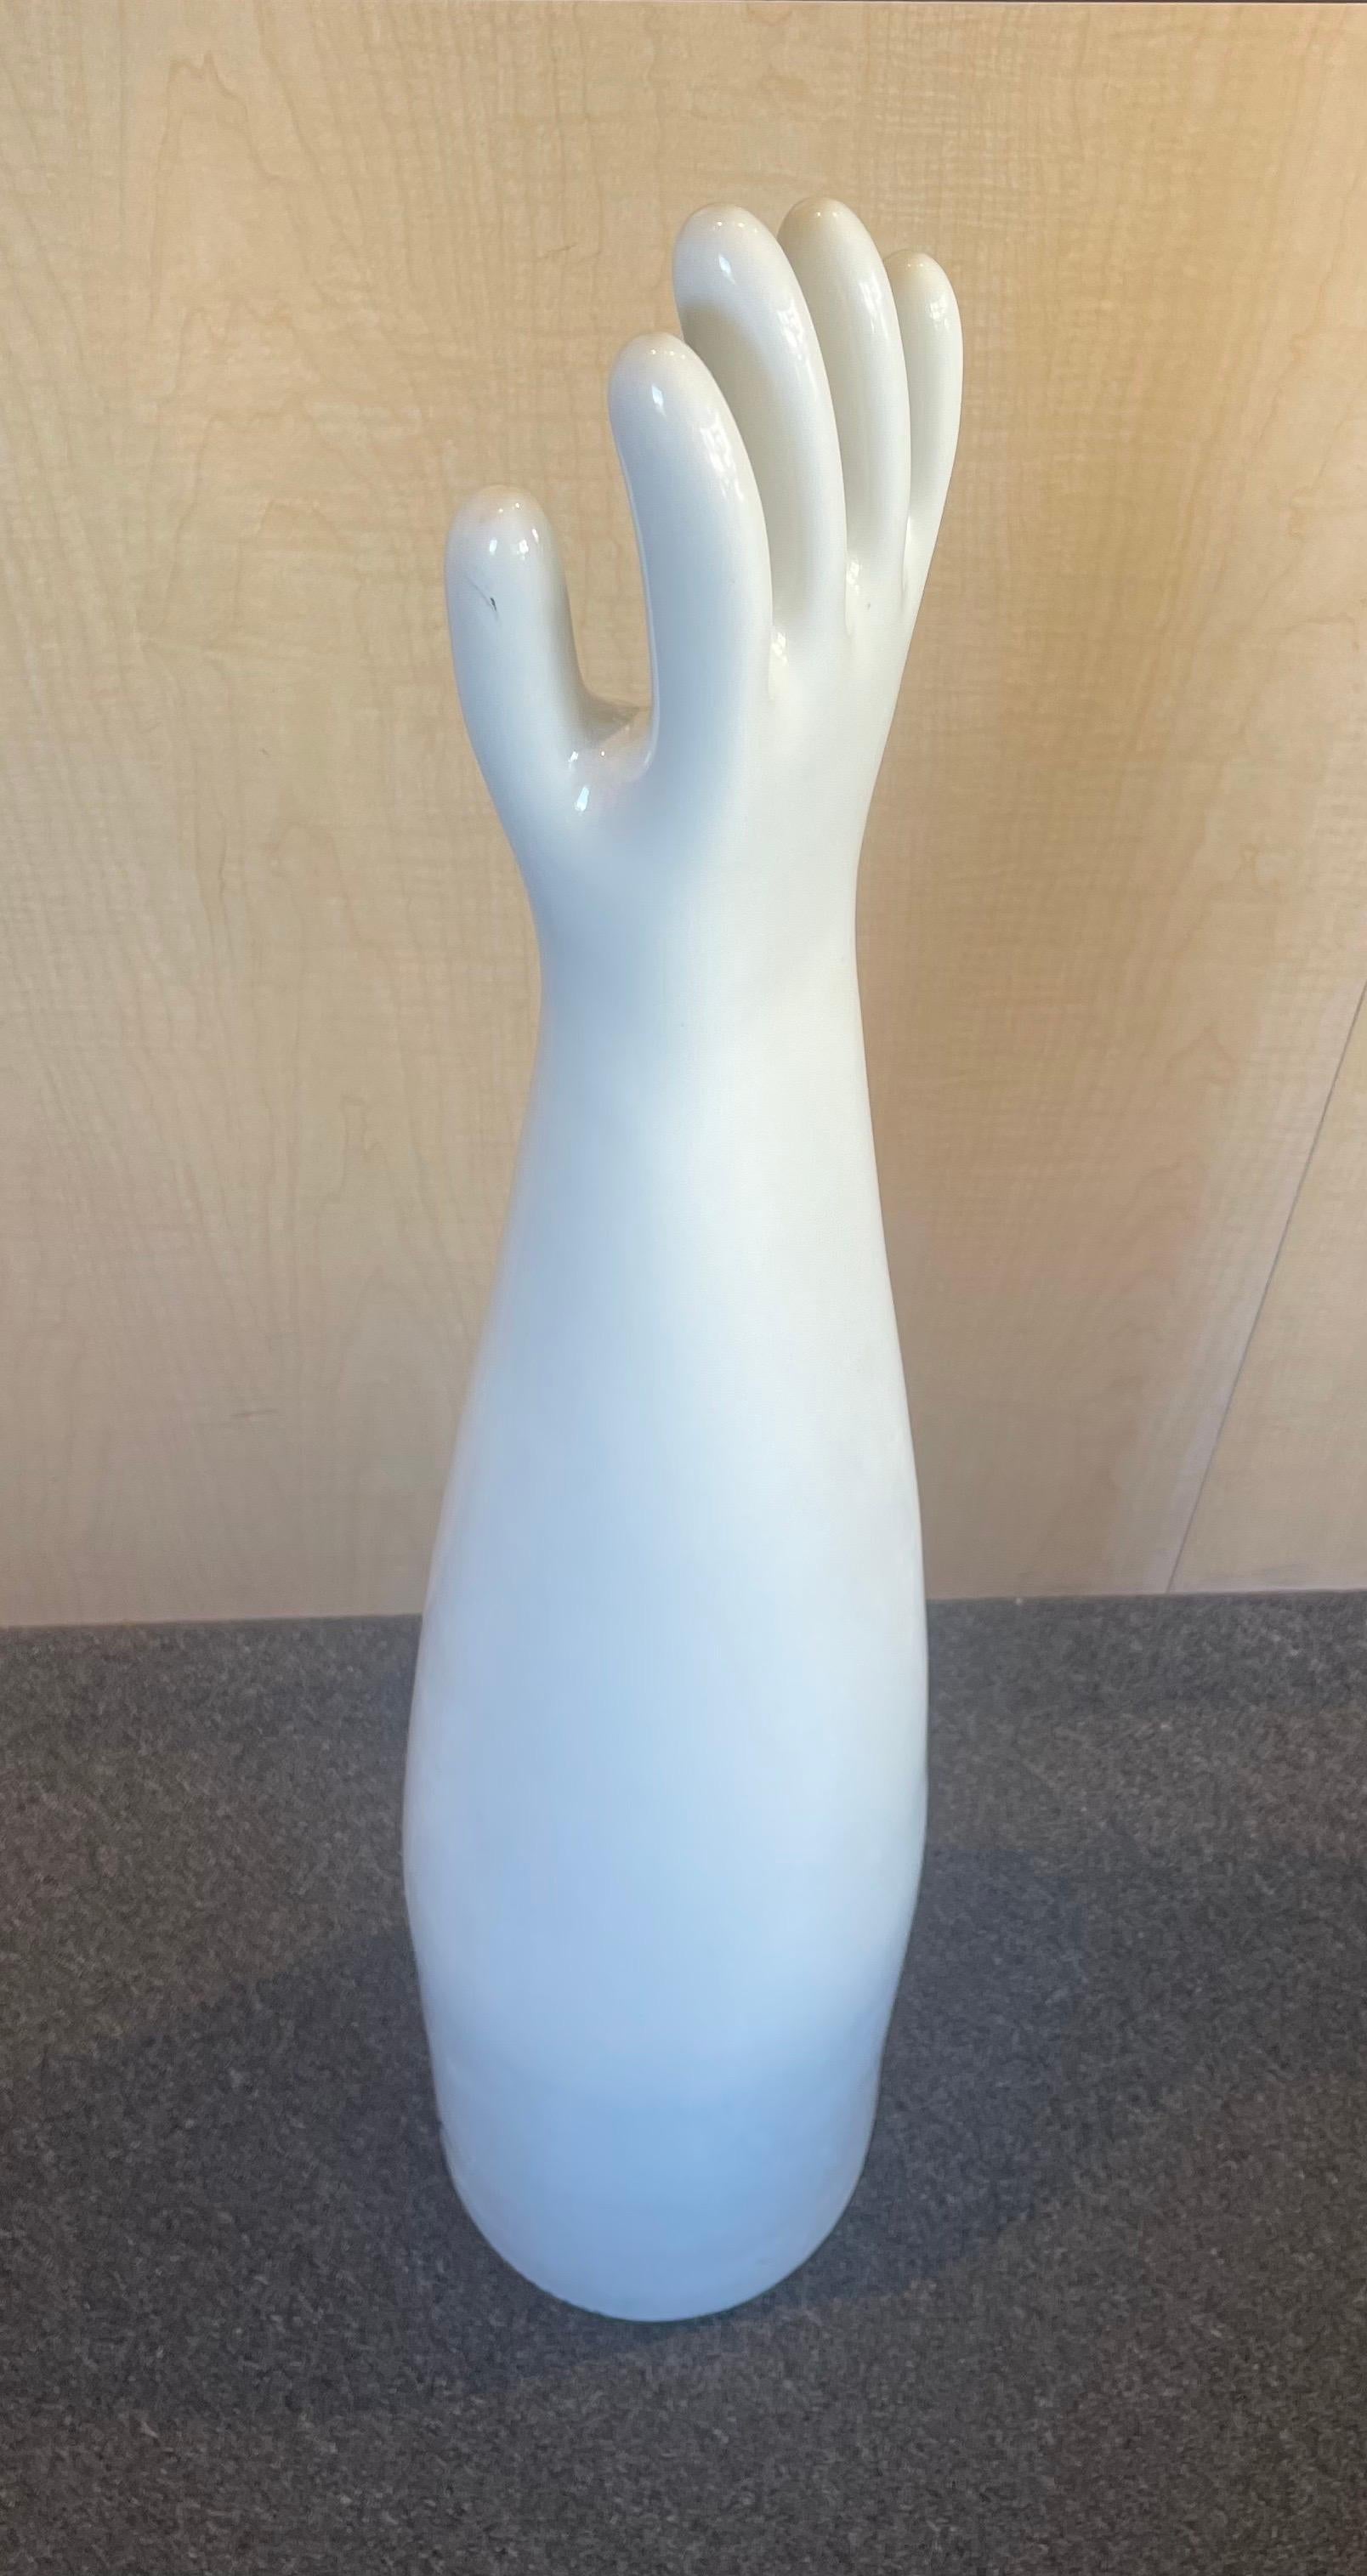 Massive Industrial Ceramic Glove Mold by Shinko of Japan In Good Condition For Sale In San Diego, CA